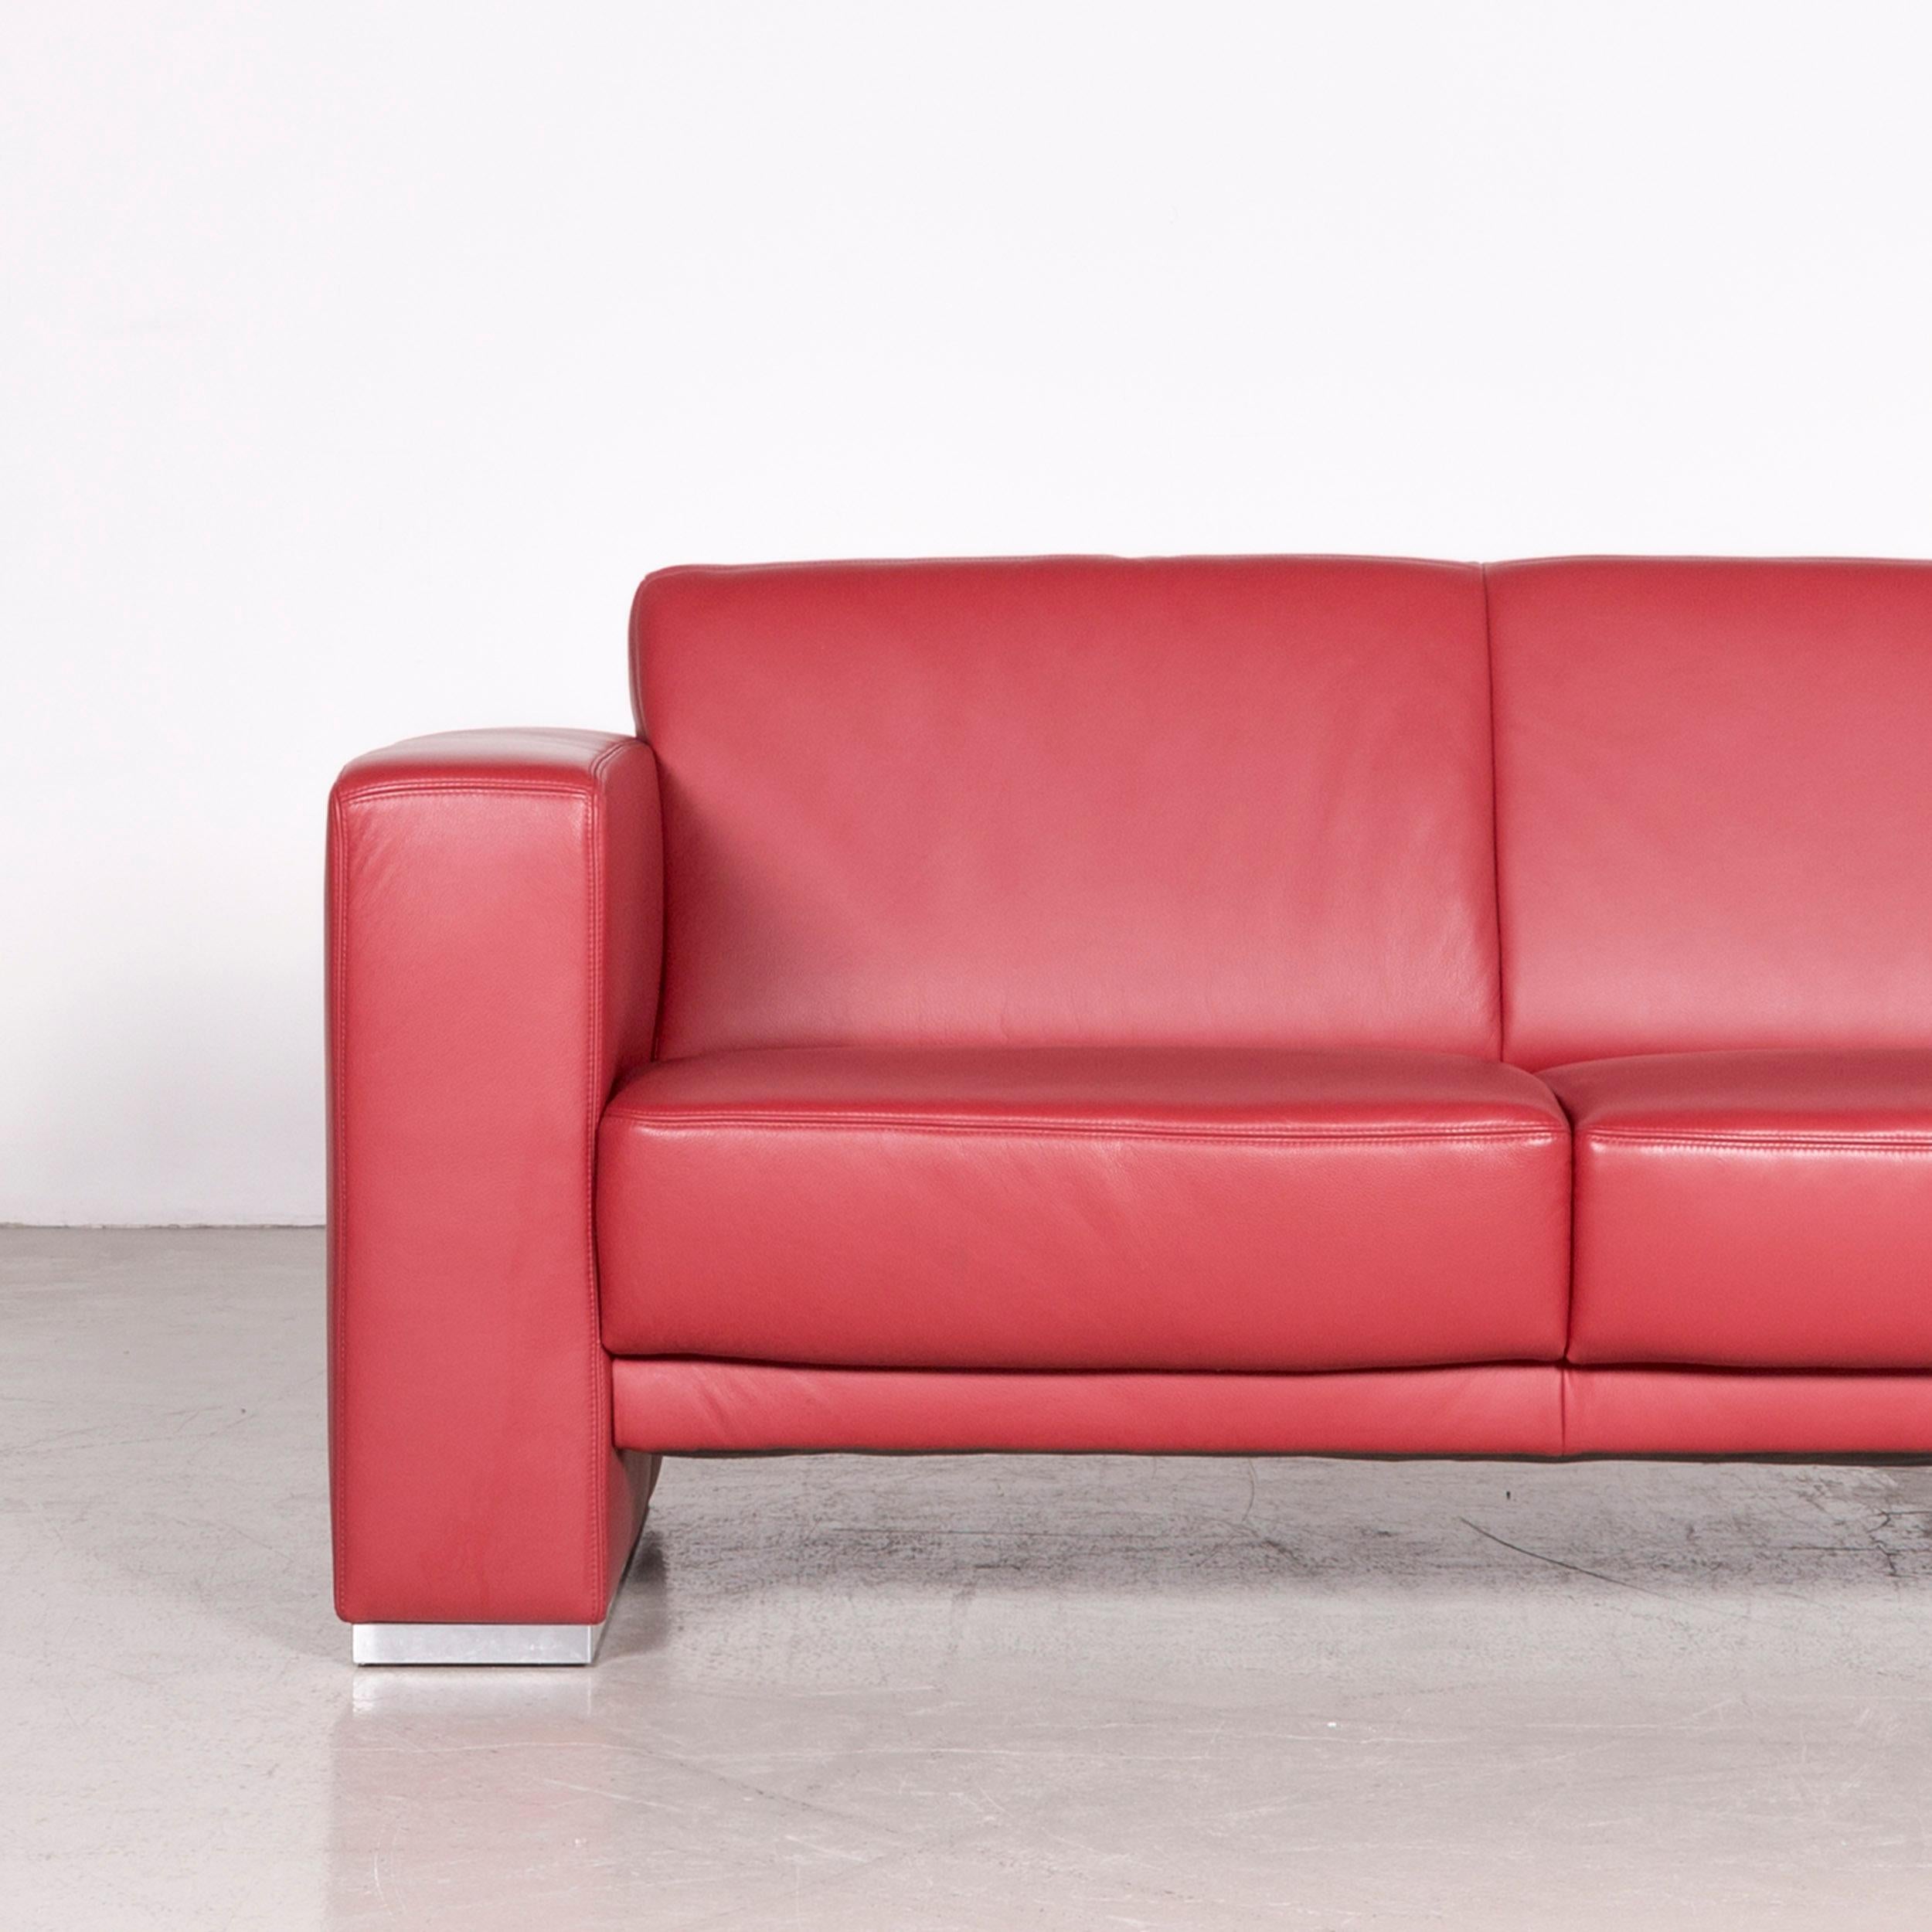 Koinor Nove Designer Leather Sofa Red Two-Seat Couch 9